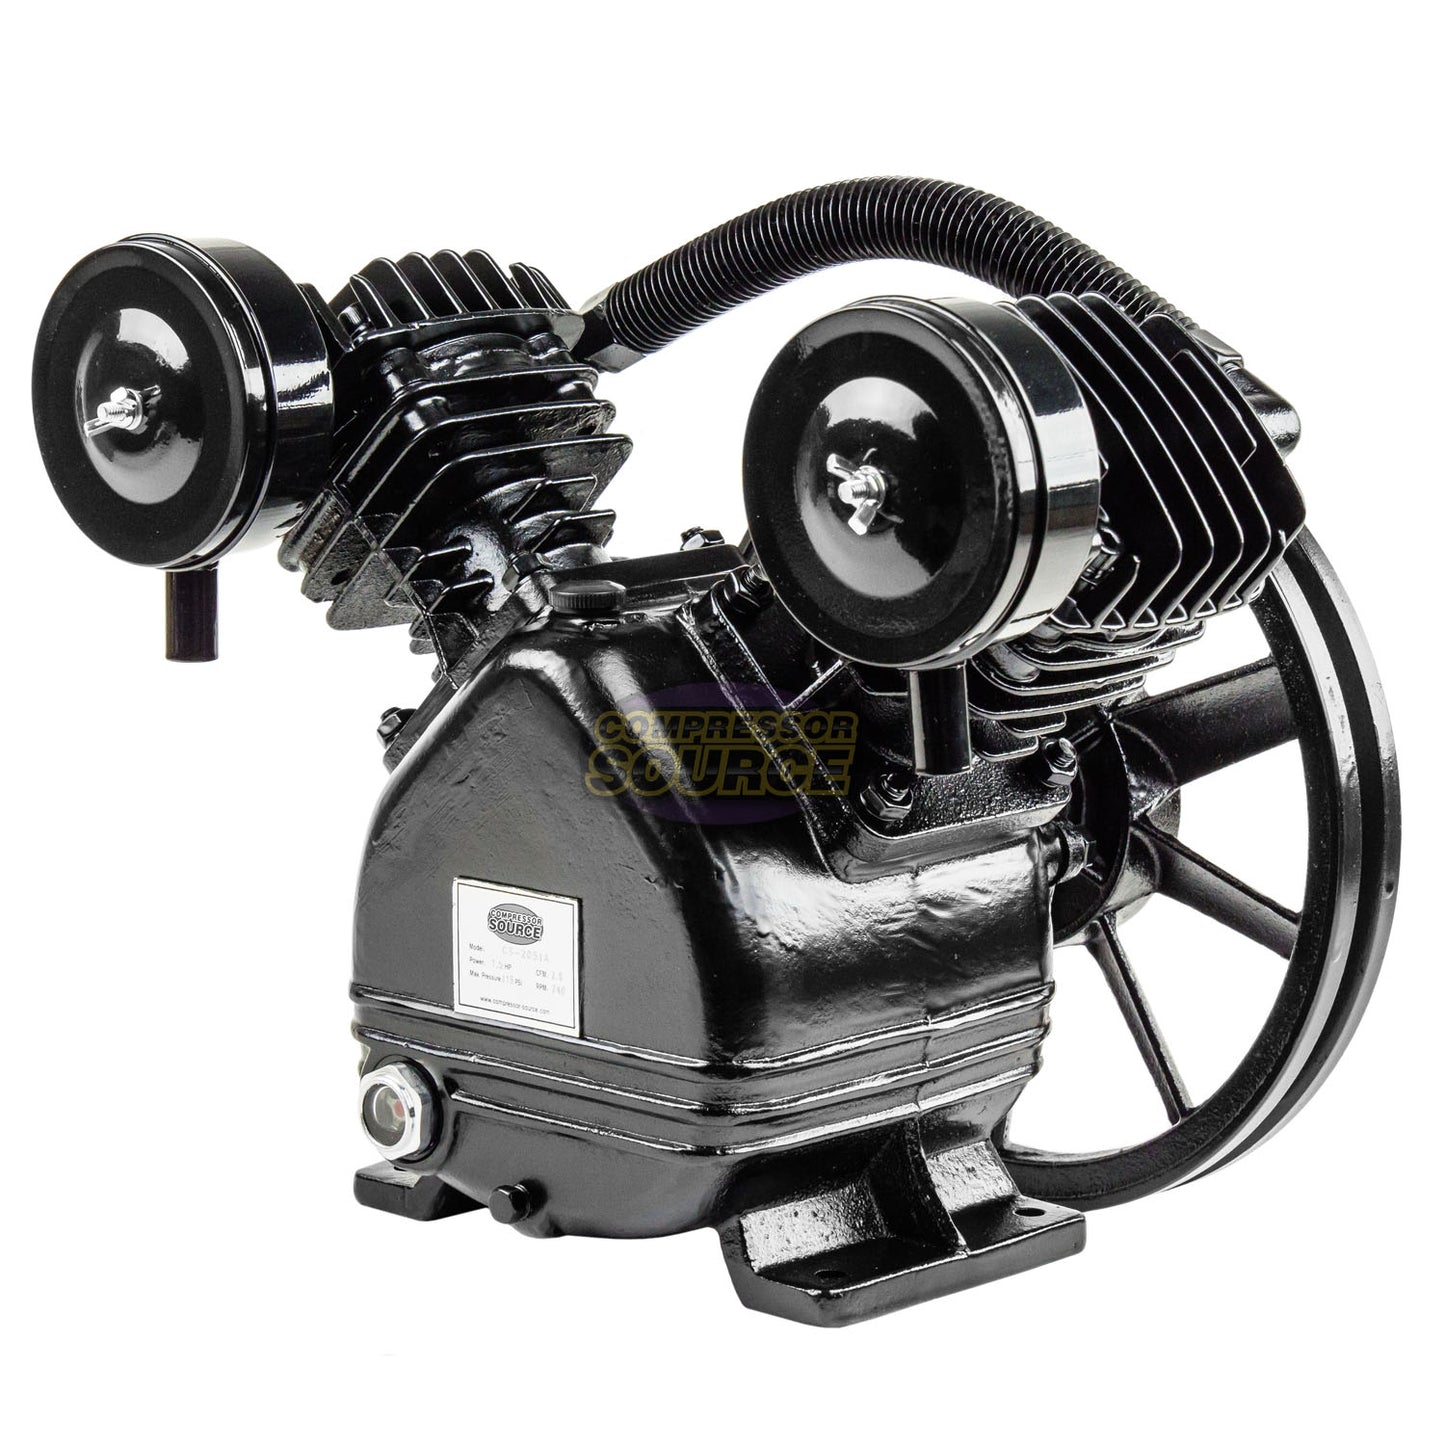 2 - 3 HP Replacement Air Compressor Pump Single Stage Two Cylinder 7 CFM